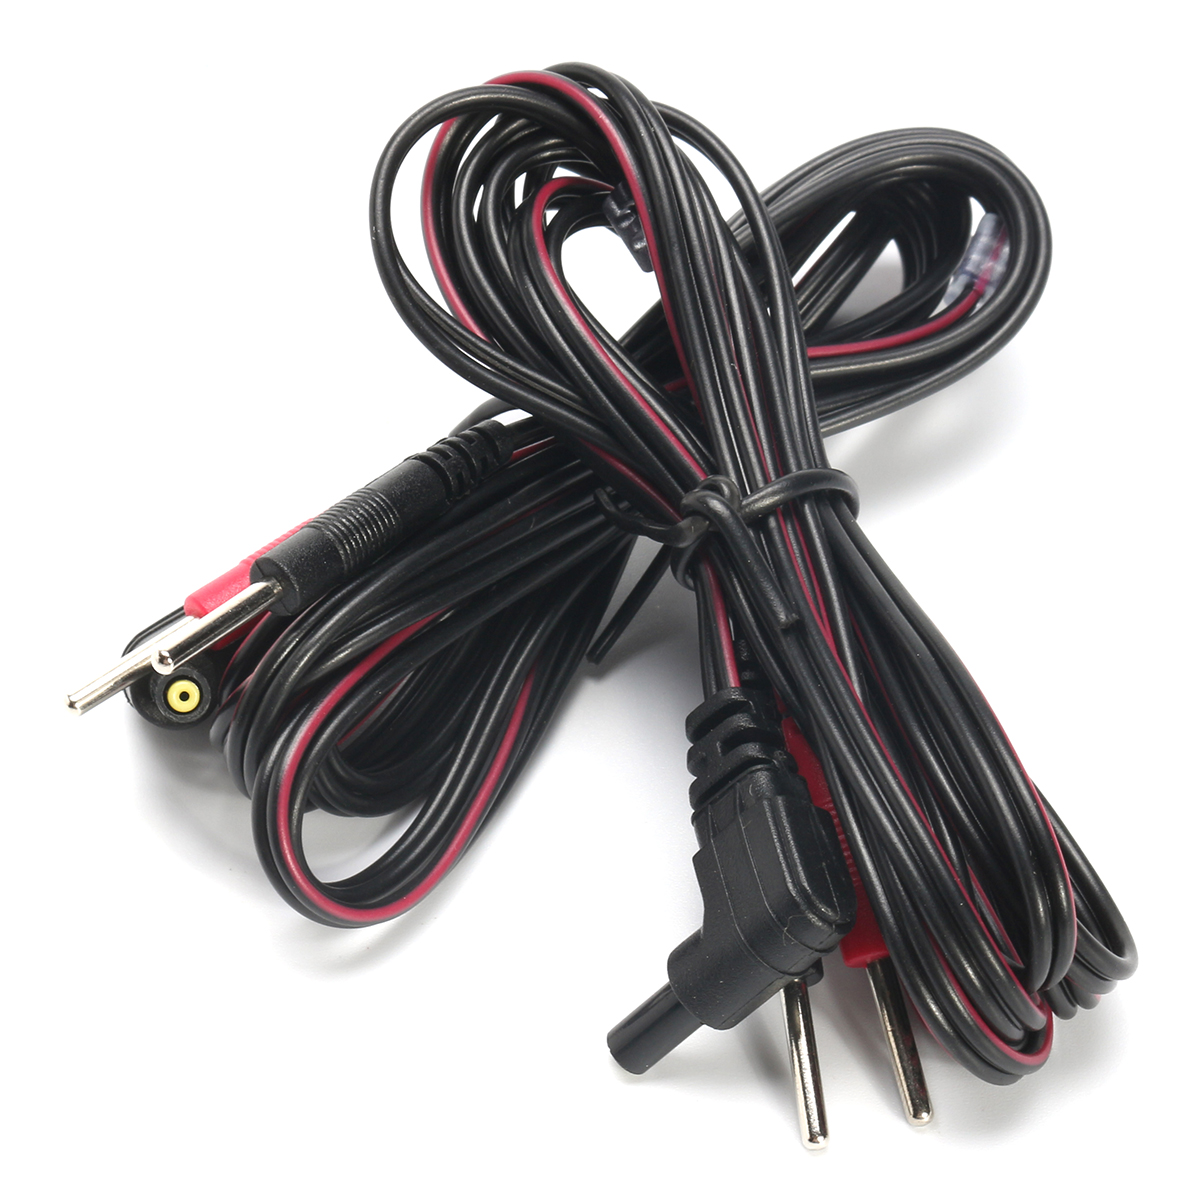 2Pcs-Standard-Electrode-Lead-Wires-Standard-Pin-Connection-Massager-Accessories-1300464